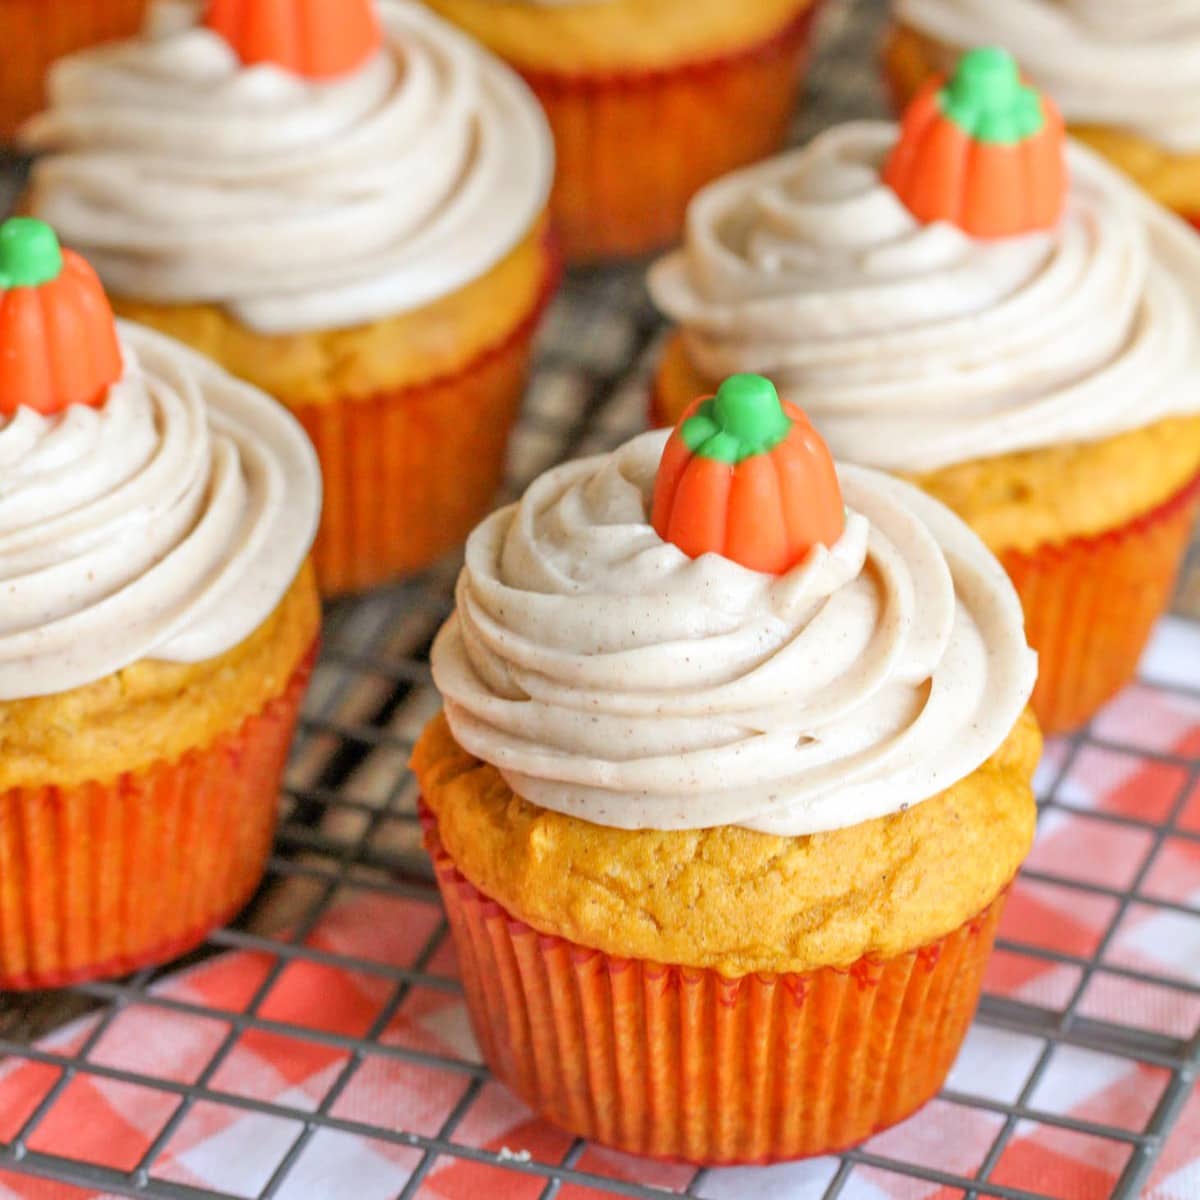 Halloween dinner ideas - easy pumpkin cupcakes topped with candy pumpkins.